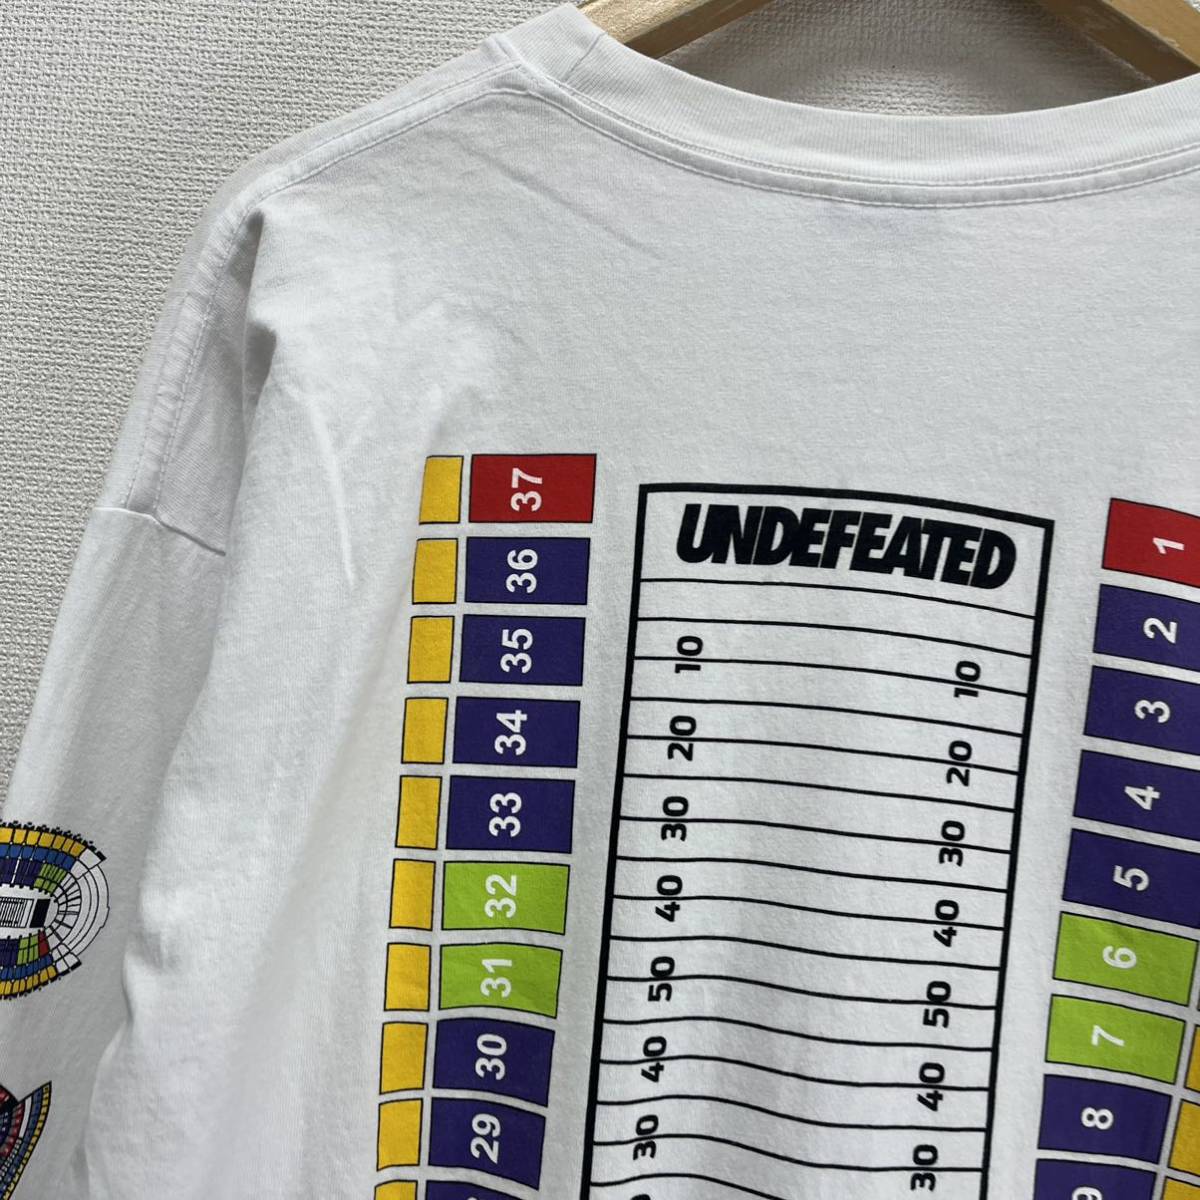 UNDEFEATED アンディーフィーテッド 長袖Tシャツ ロンT プリント カットソー L 10112787_画像7